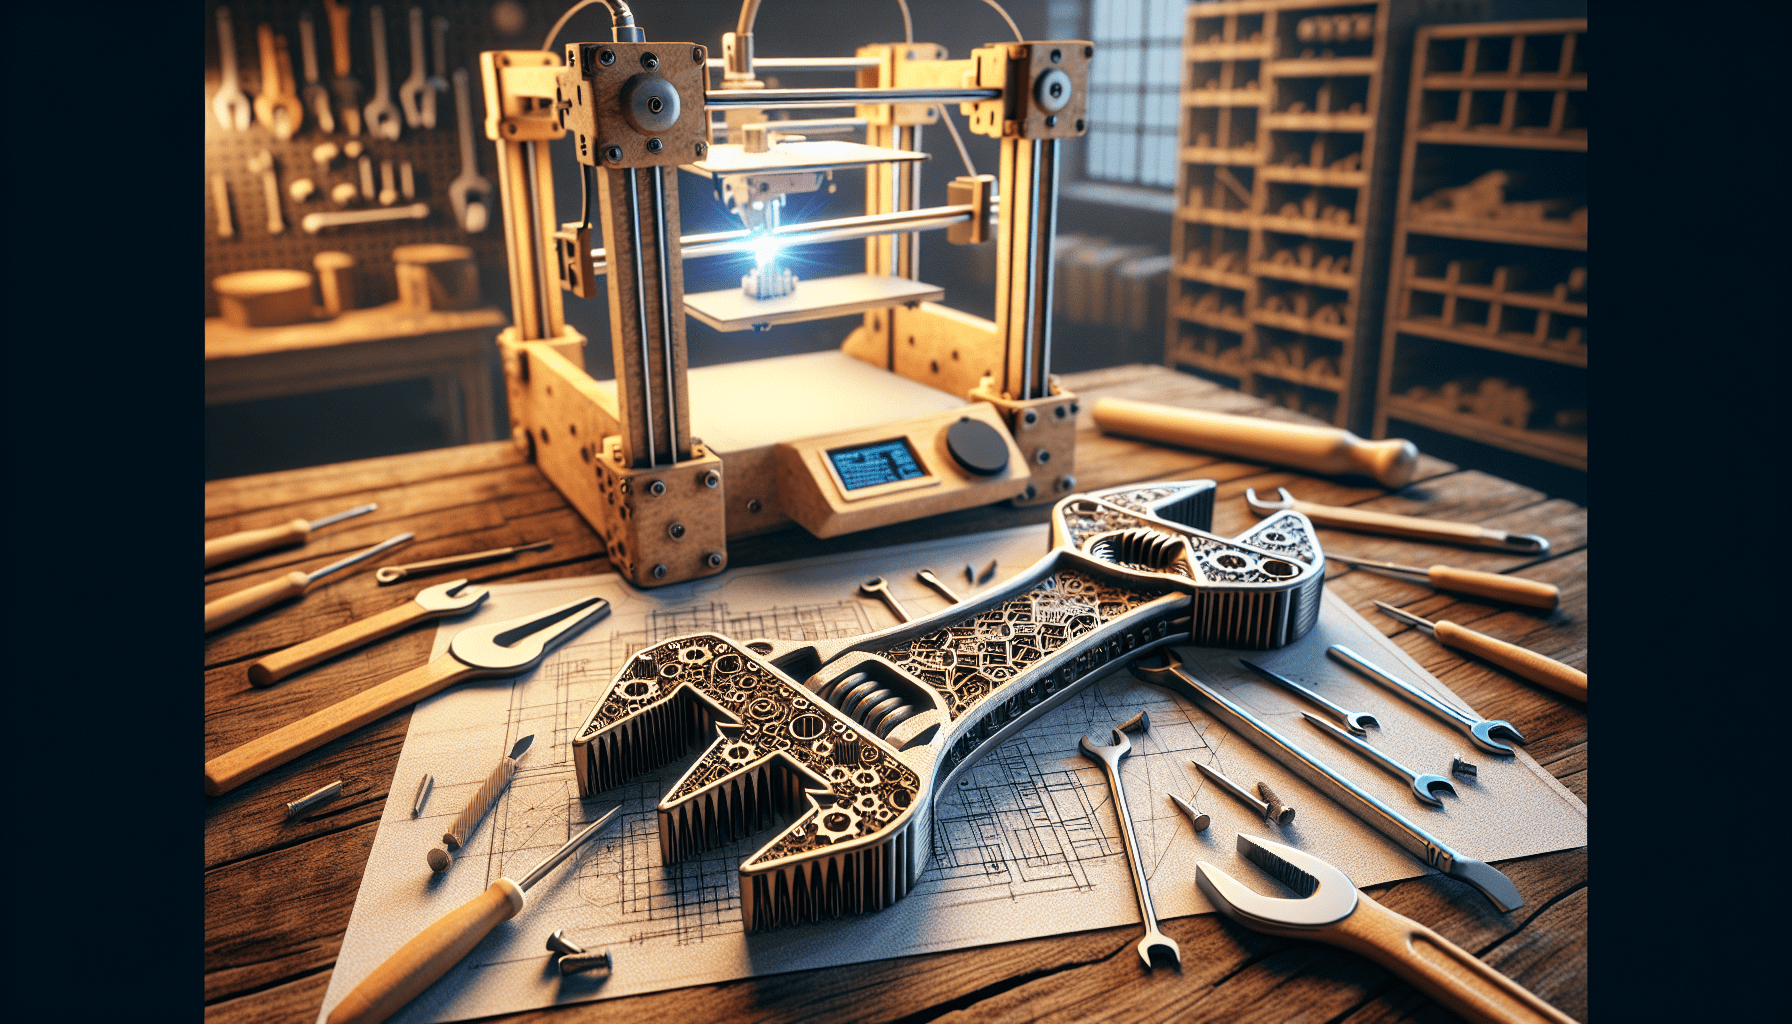 12-more-3d-printed-tools-you-need-for-your-workshop-1 12 more 3D printed tools you need for your workshop